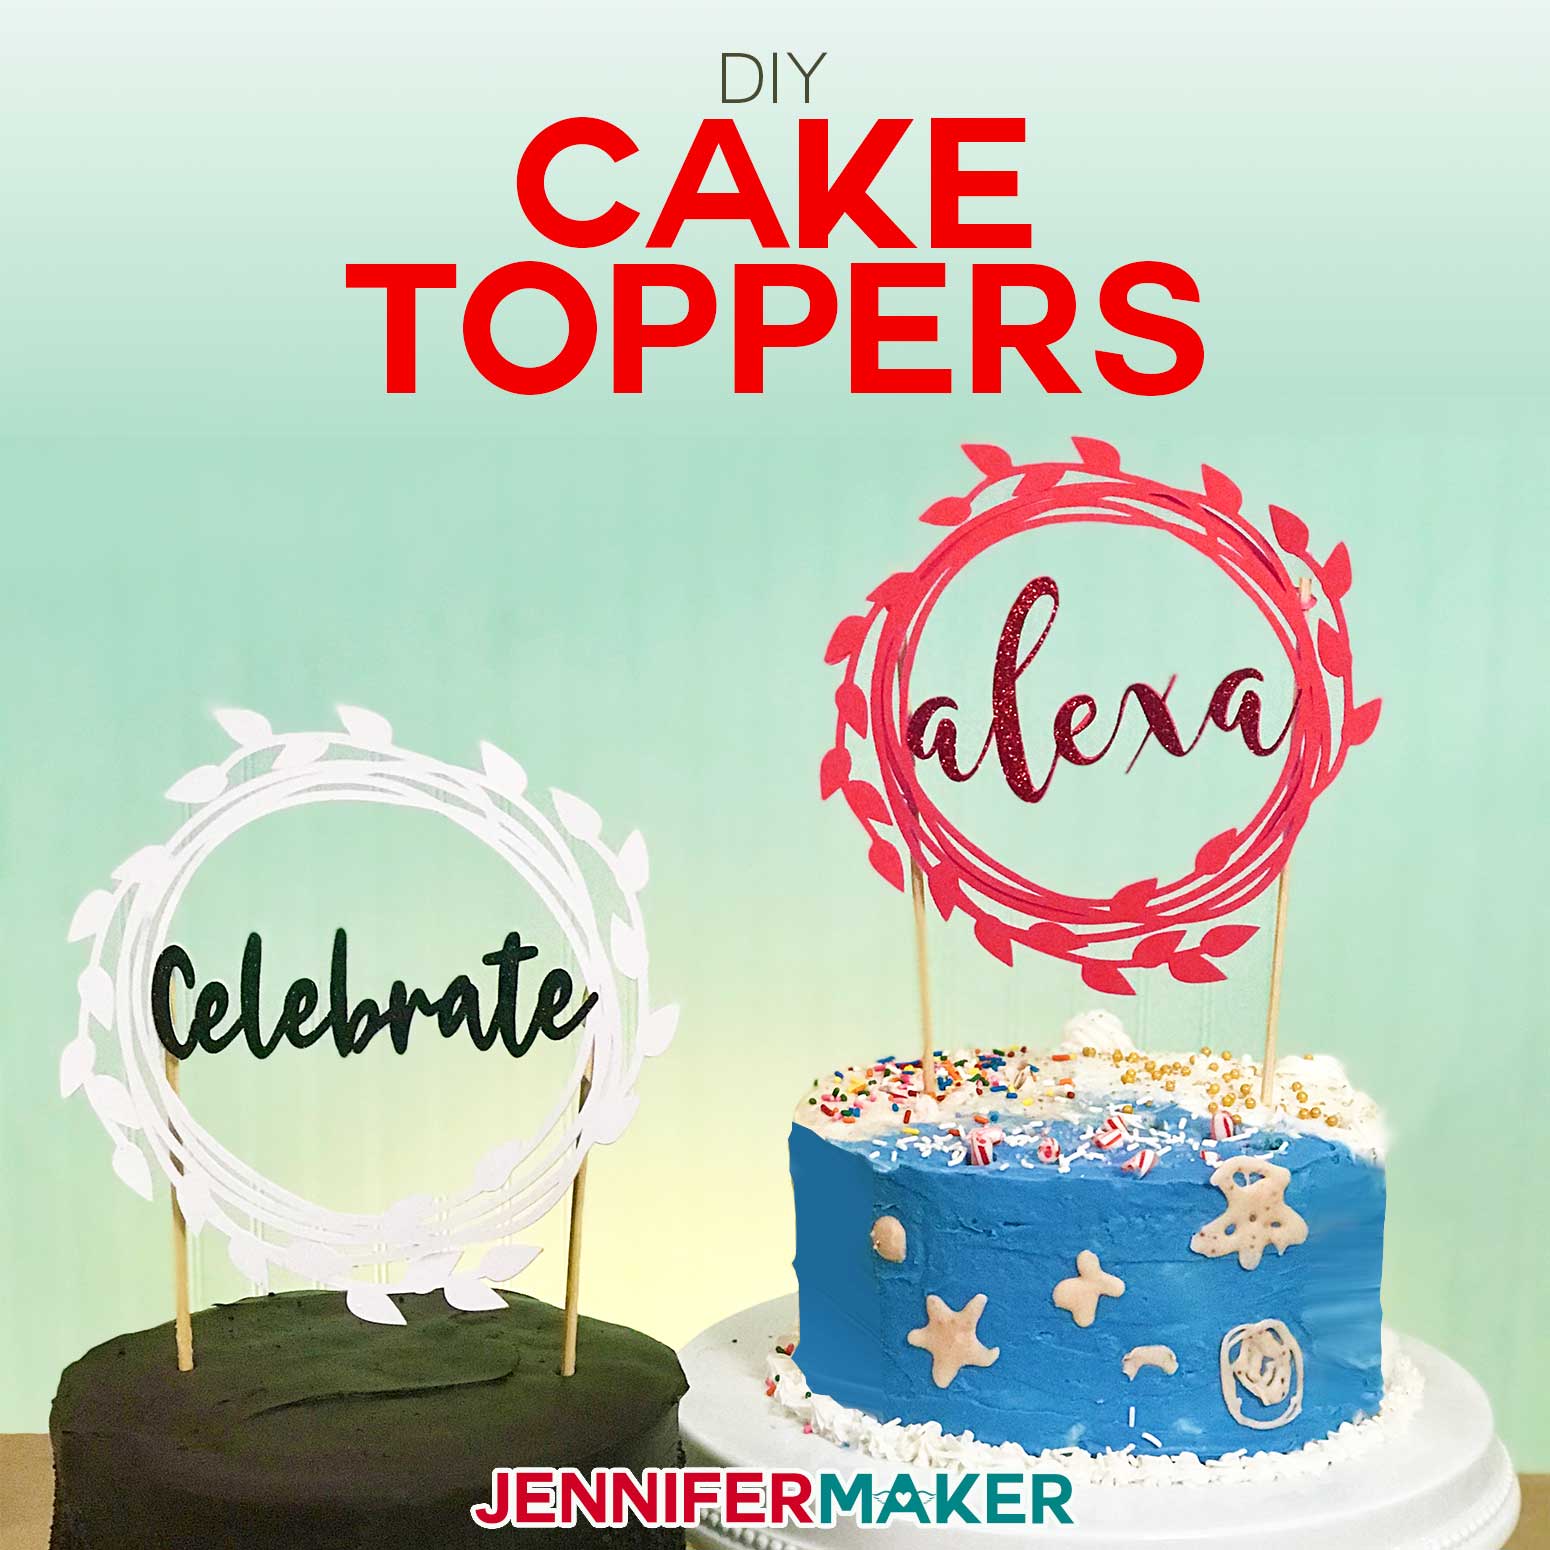 DIY Cake Toppers with Custom Names and Sentiments Cut on a Cricut ] Free SVG Cut File #cricut #cakedecorating #birthday